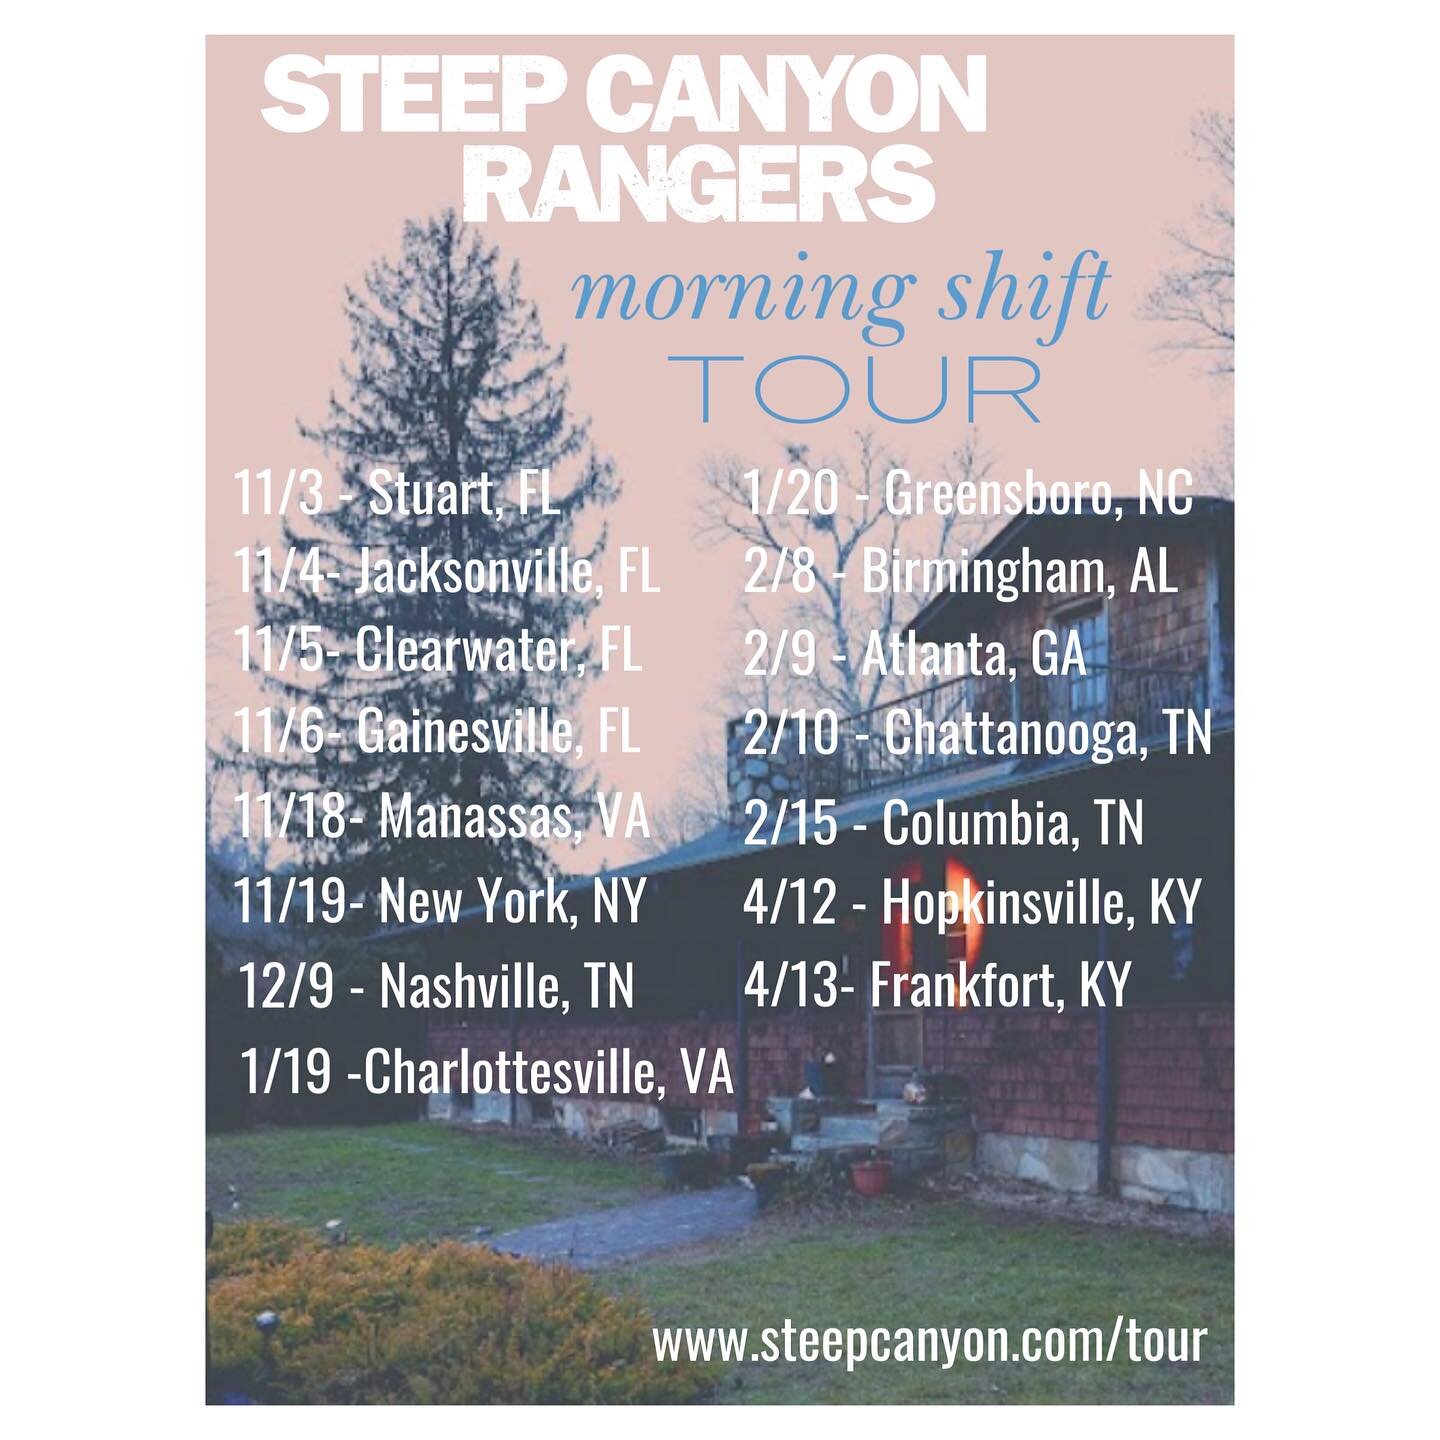 Lots of new dates to get excited about and many more to come! 

Tickets are available NOW for all shows except Atlanta and Chattanooga- they will go on sale Friday 11/3. 

Ticket links can be found on our website (link in bio). 

#steepcanyonrangers 